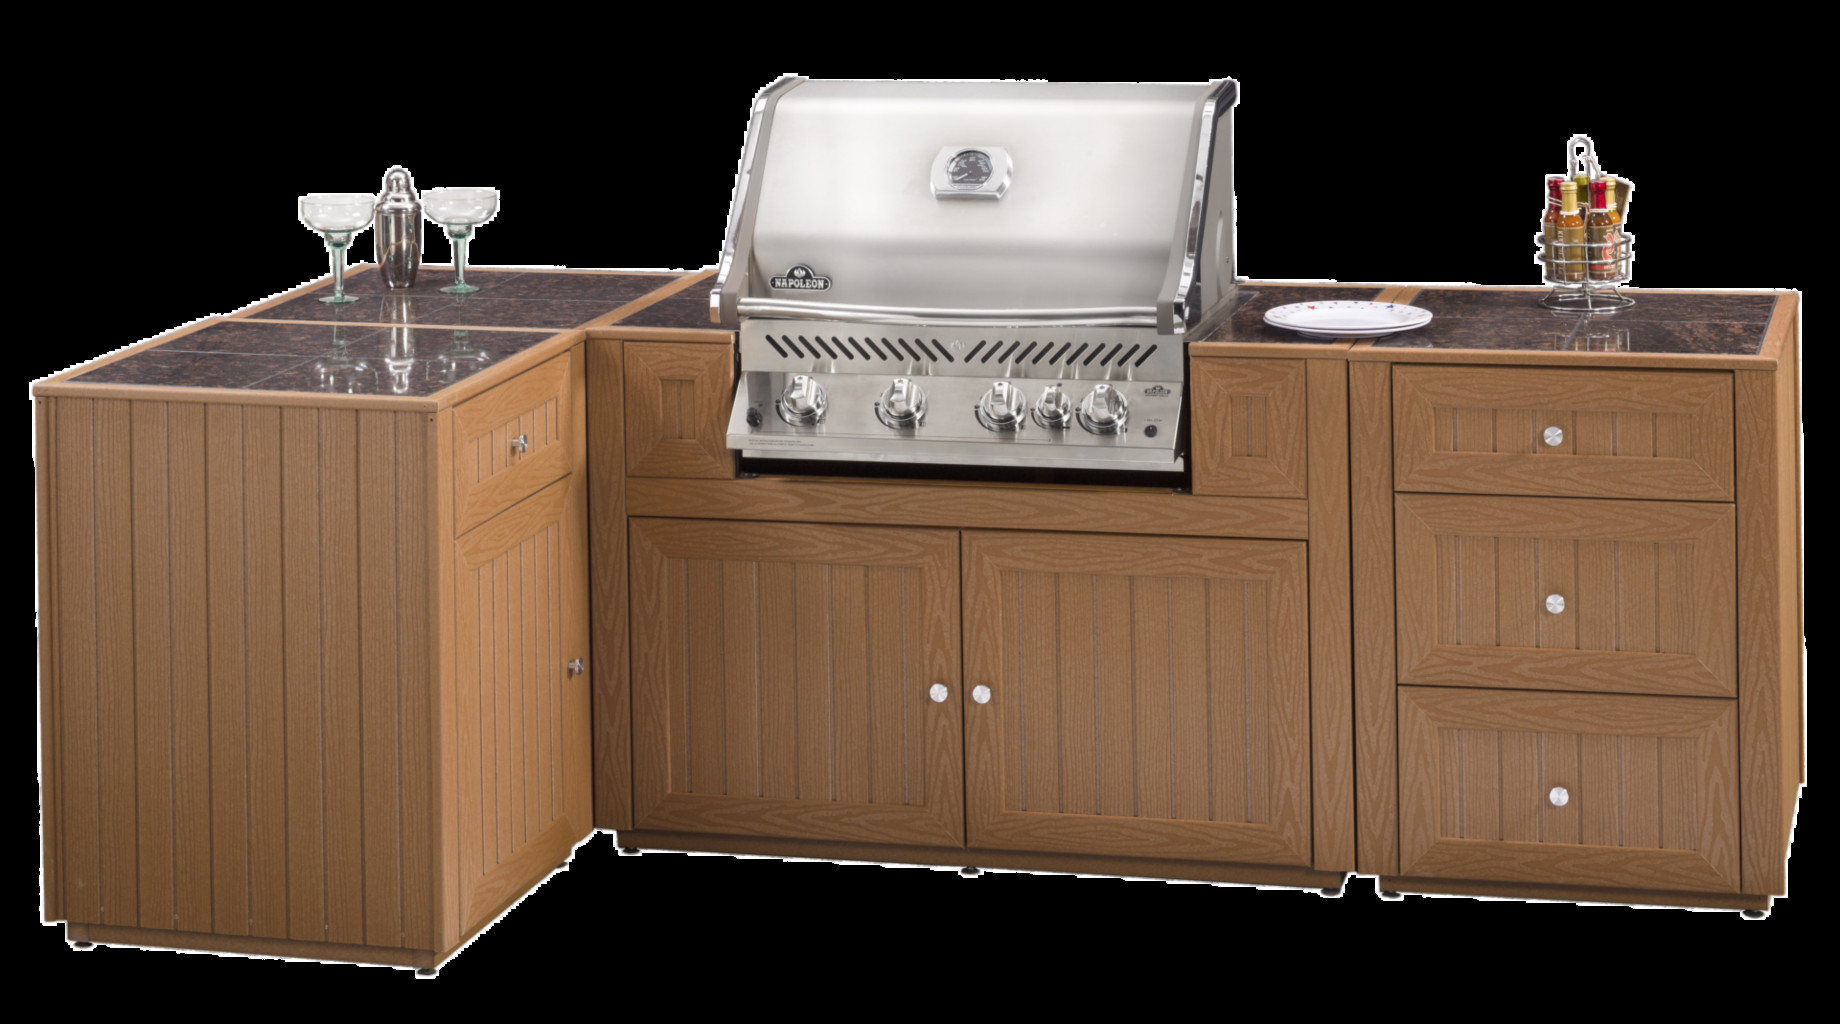 Kitchen Counter Png
 Outdoor Kitchens Aspen Spas